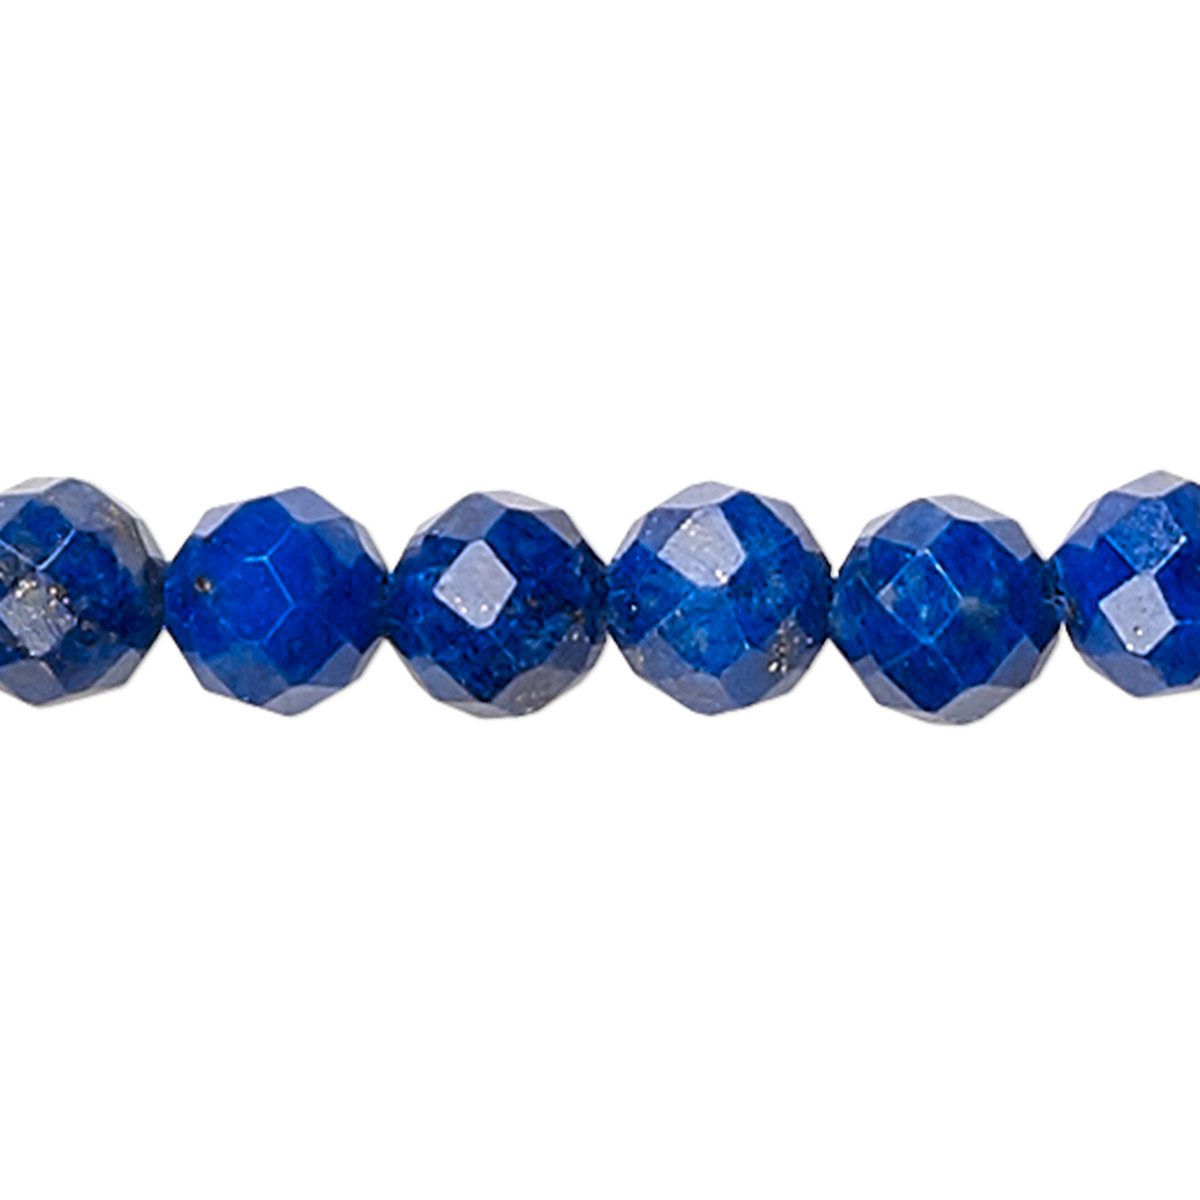 Bead Lapis Lazuli Natural 4mm Faceted Round A Grade Mohs